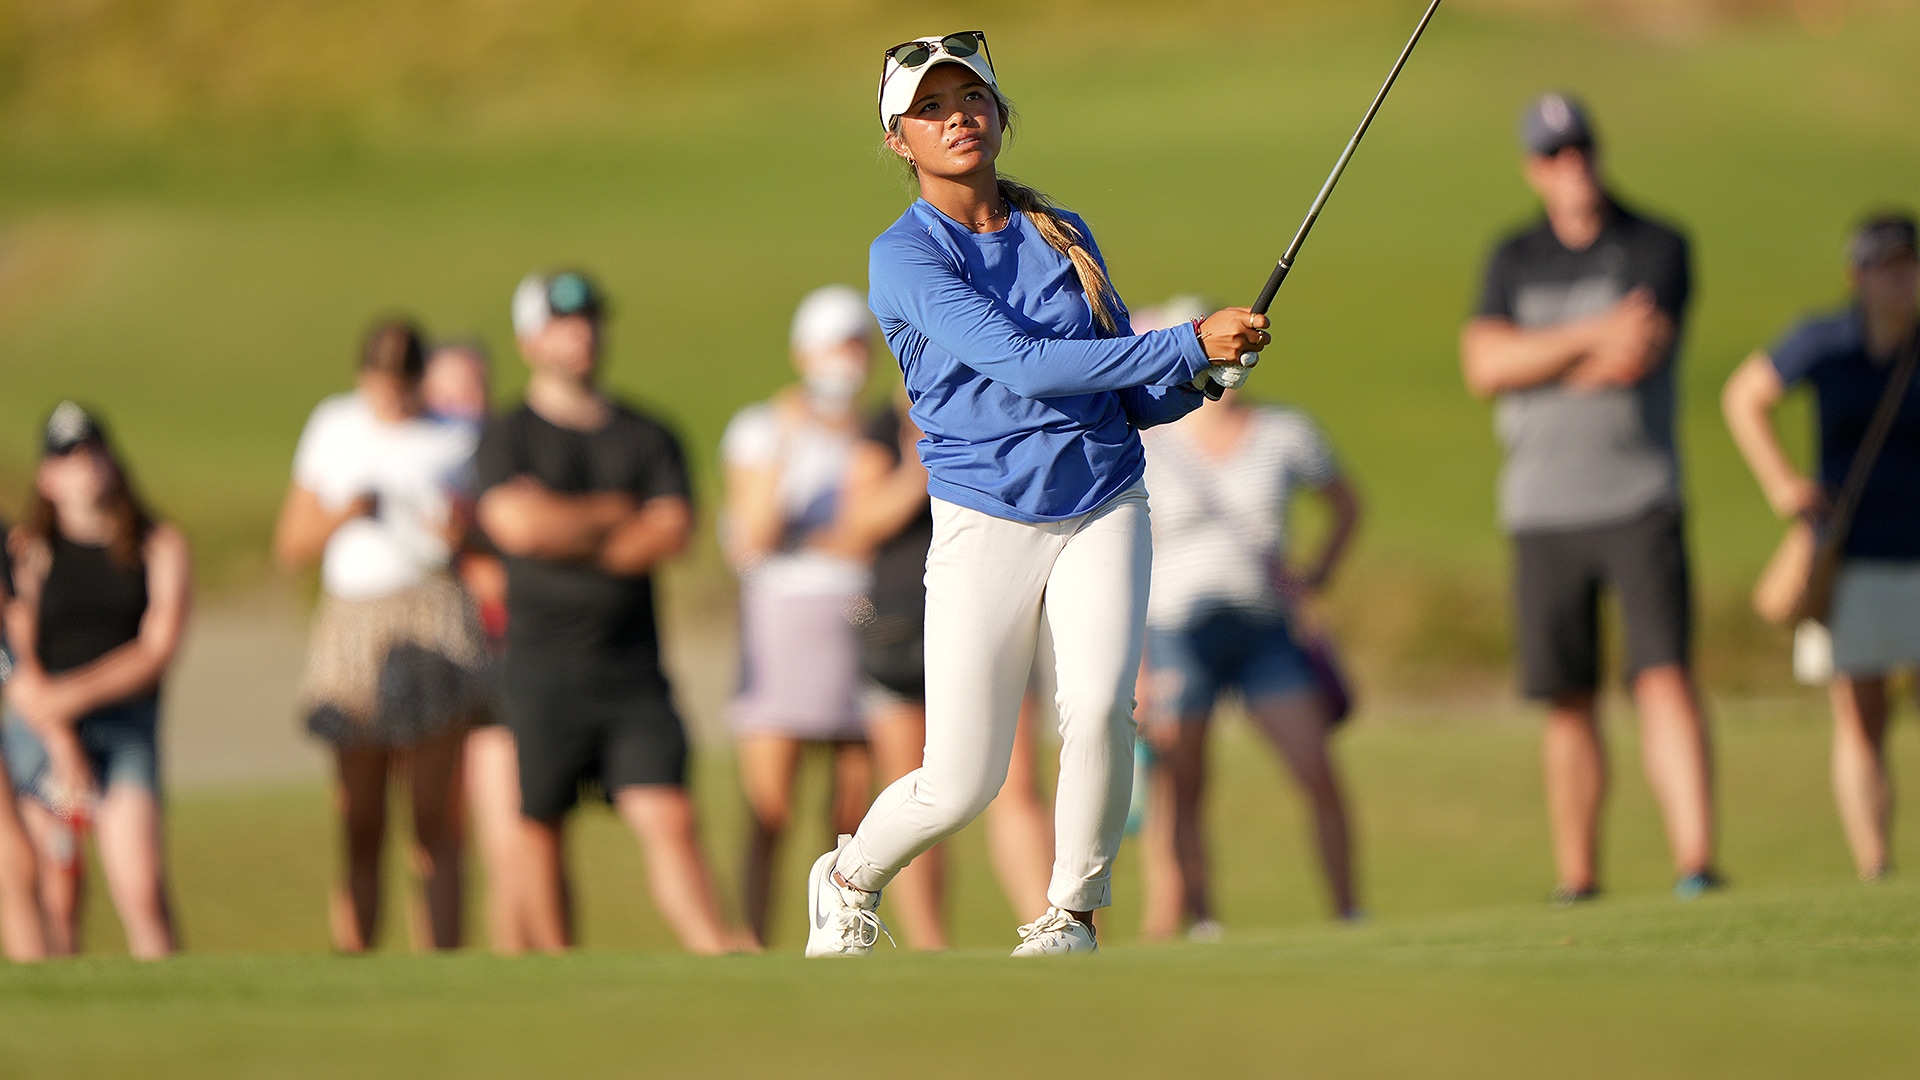 Meet the quarterfinalist in the U.S. Women’s Amateur at Chambers Bay